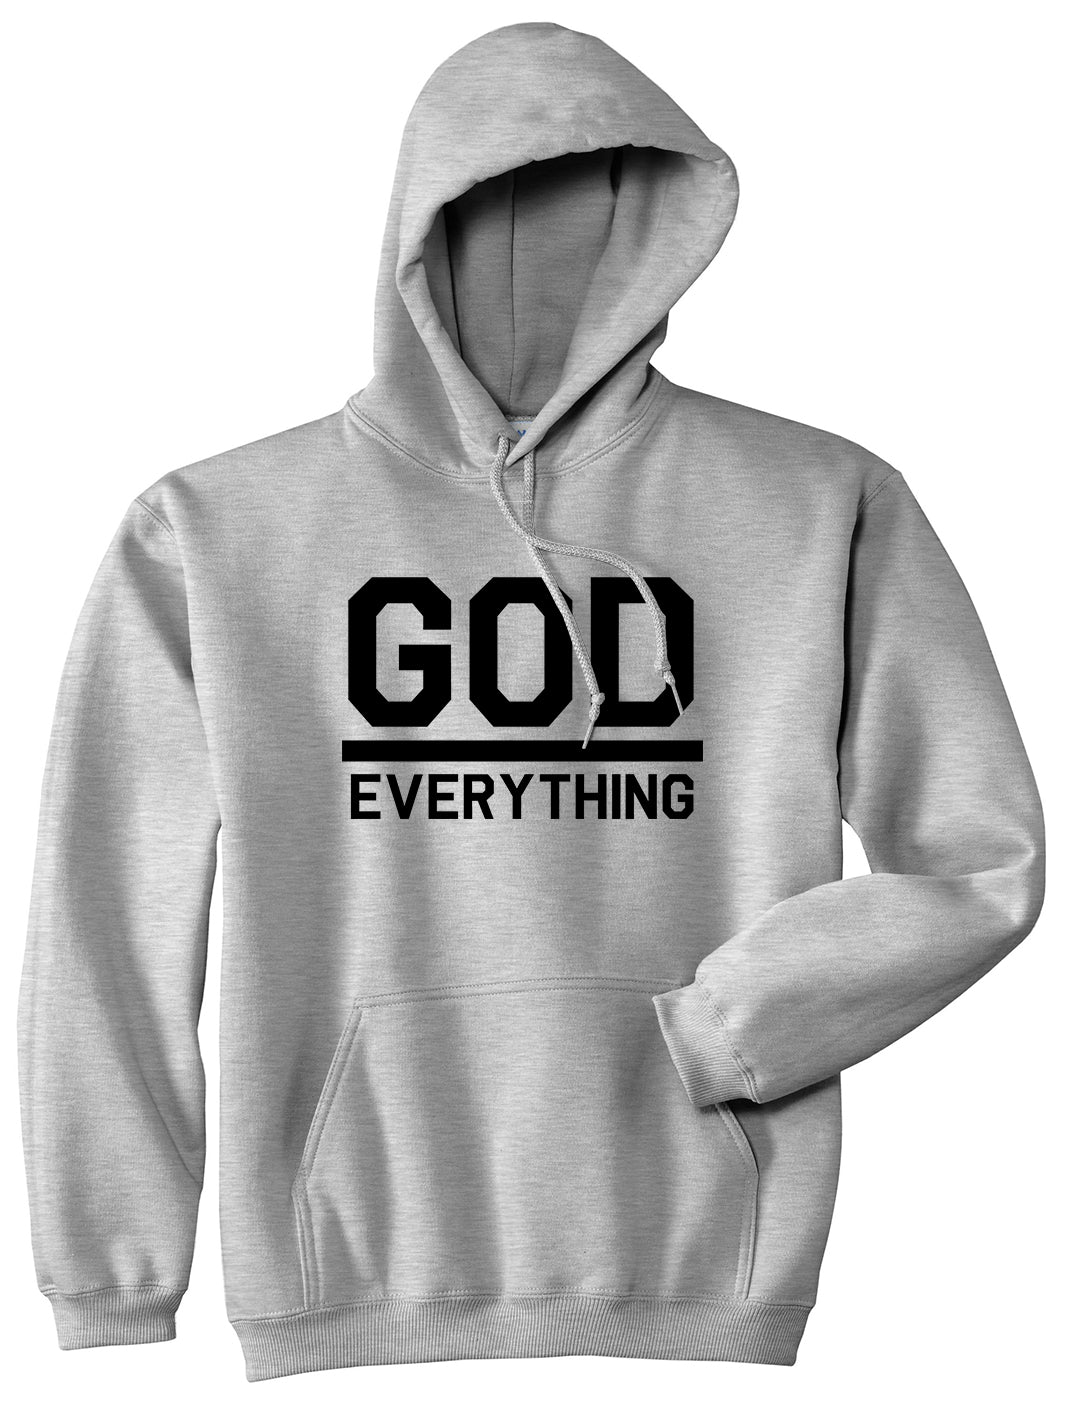 God Over Everything Mens Pullover Hoodie Grey